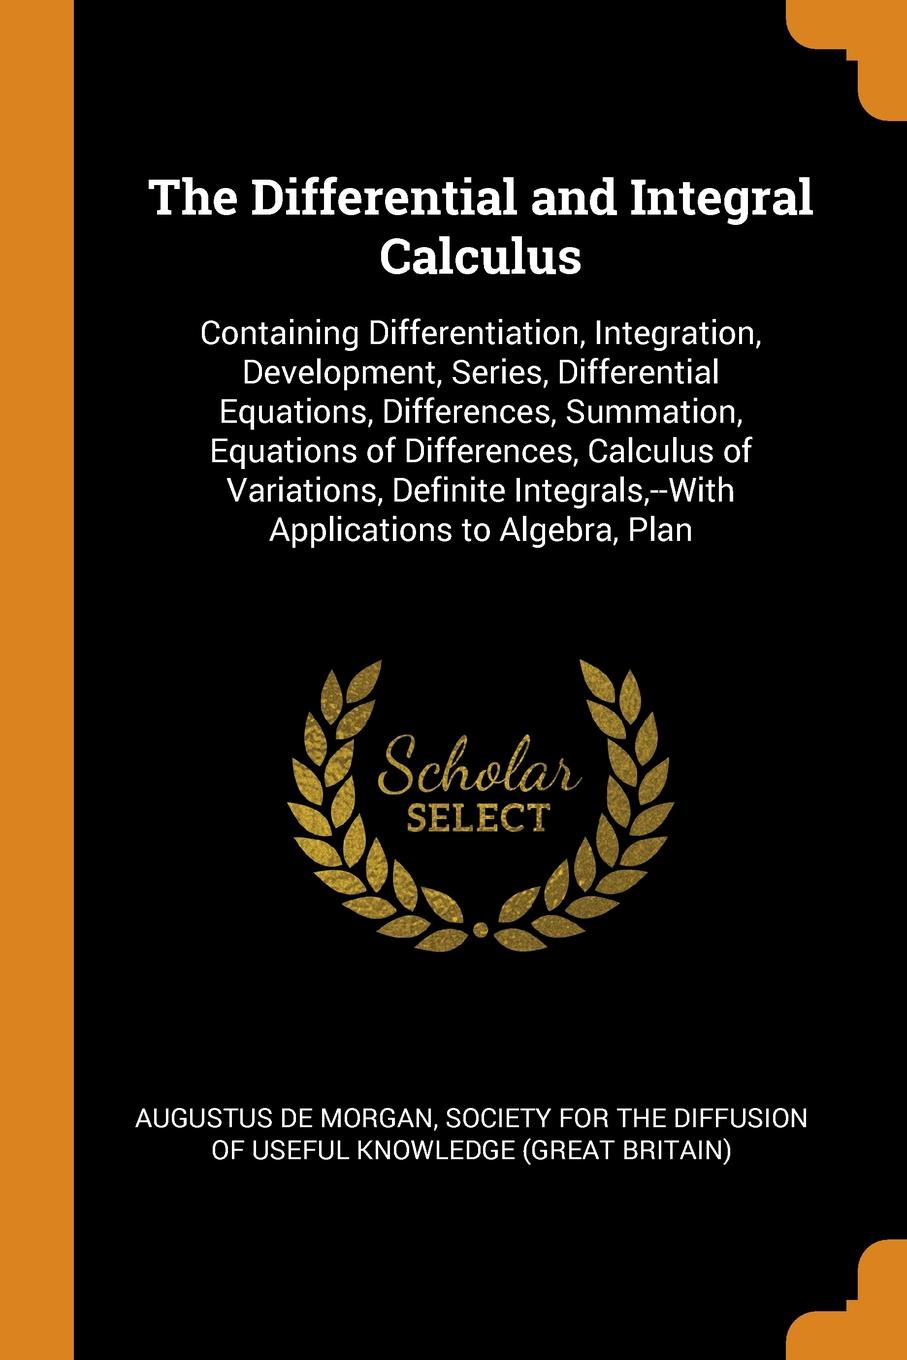 The Differential and Integral Calculus. Containing Differentiation, Integration, Development, Series, Differential Equations, Differences, Summation, Equations of Differences, Calculus of Variations, Definite Integrals,--With Applications to Algeb...